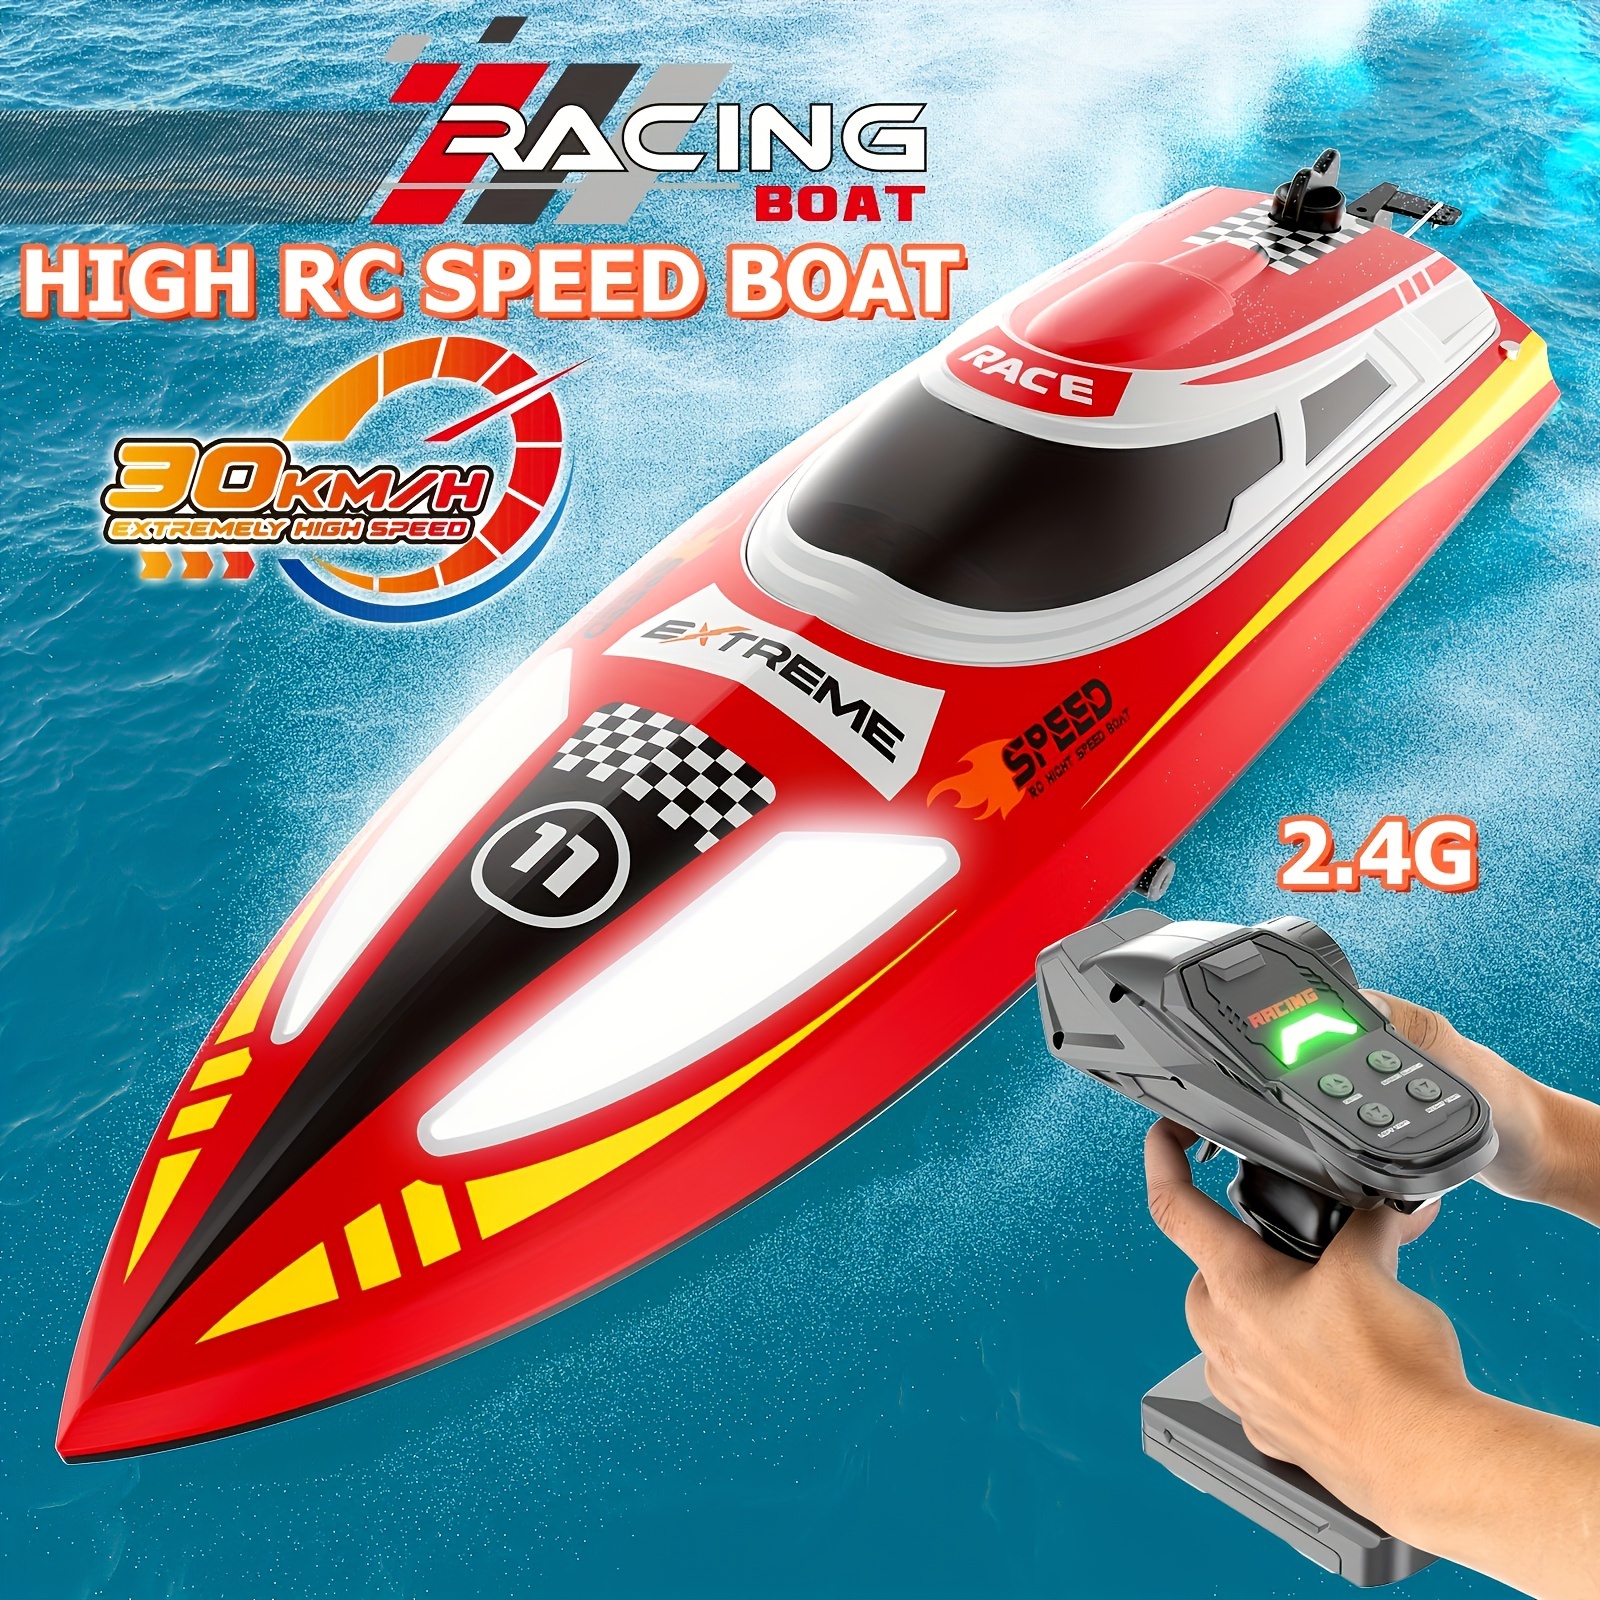 

Lake River And Pool Remote Control Boat With Cruise Control, Self-calibration, Led Lights, One-click Presentation, Fast Sailing 30kph, 2 Batteries For 60 Minutes Christmas, Gift